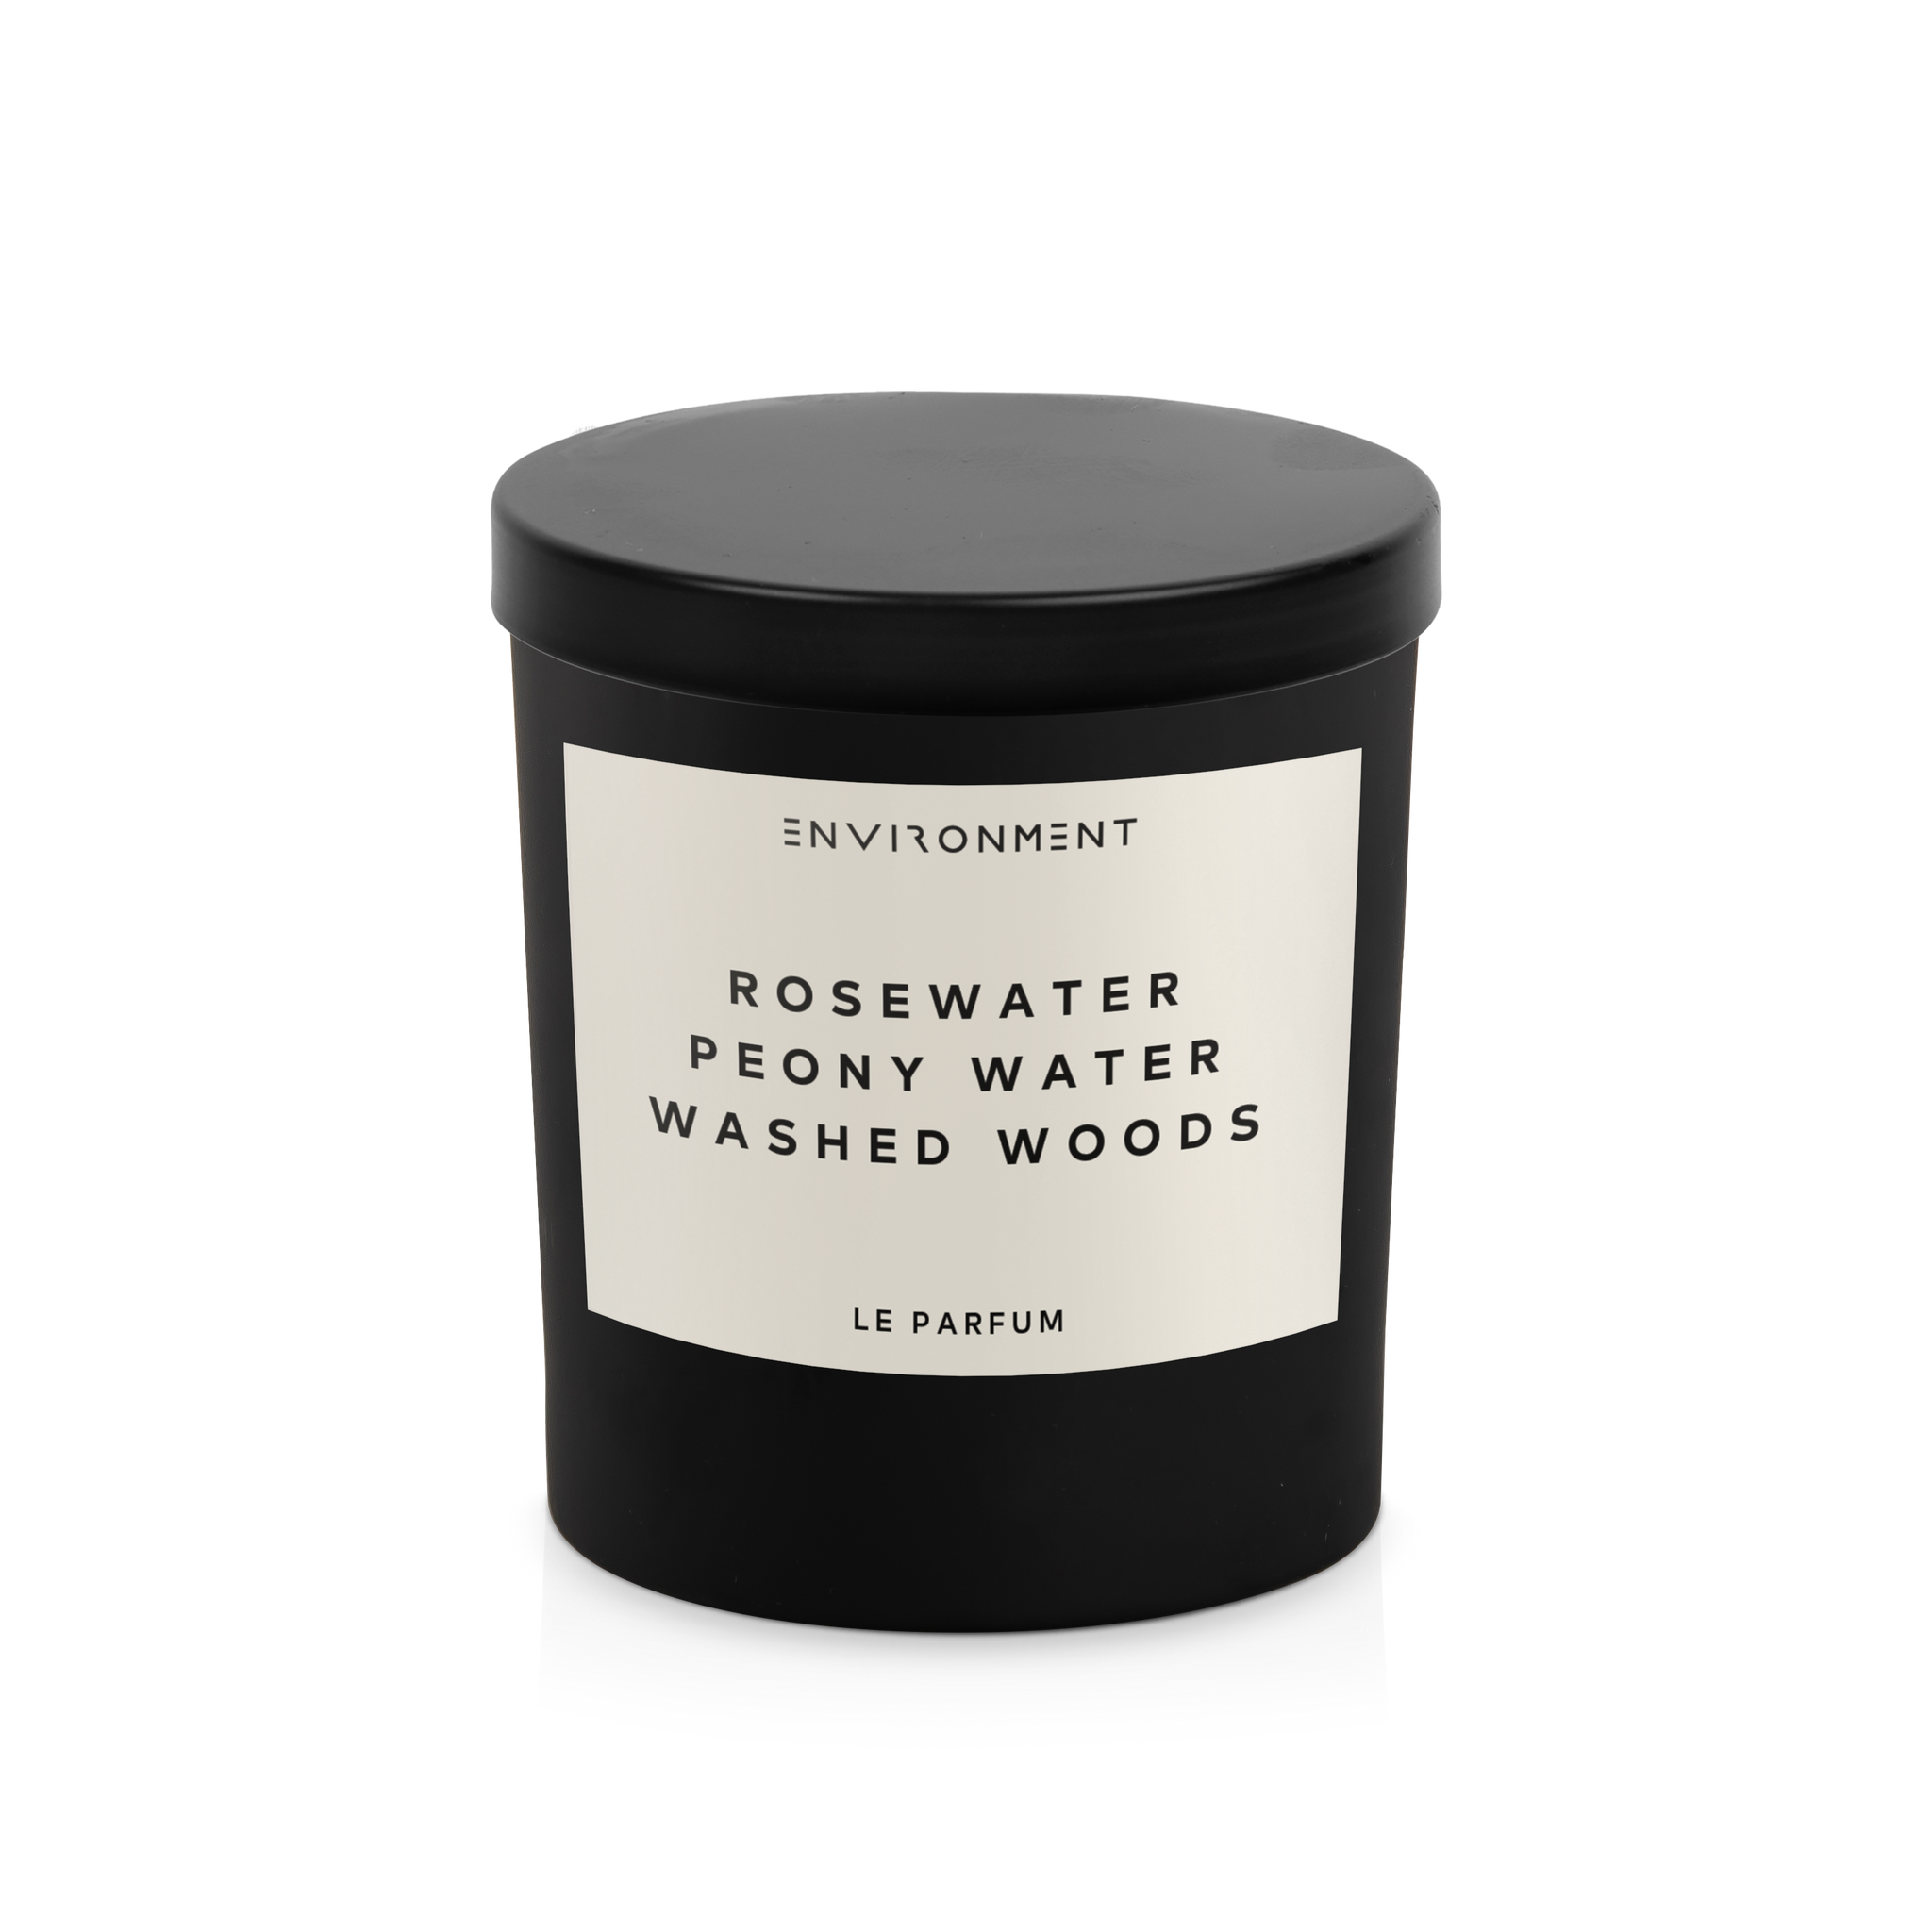 Rosewater | Peony Water | Washed Woods 200ml Diffuser and 8oz Candle Gift Pack (Inspired by Issey Miyake L'Eau d'Issey®)